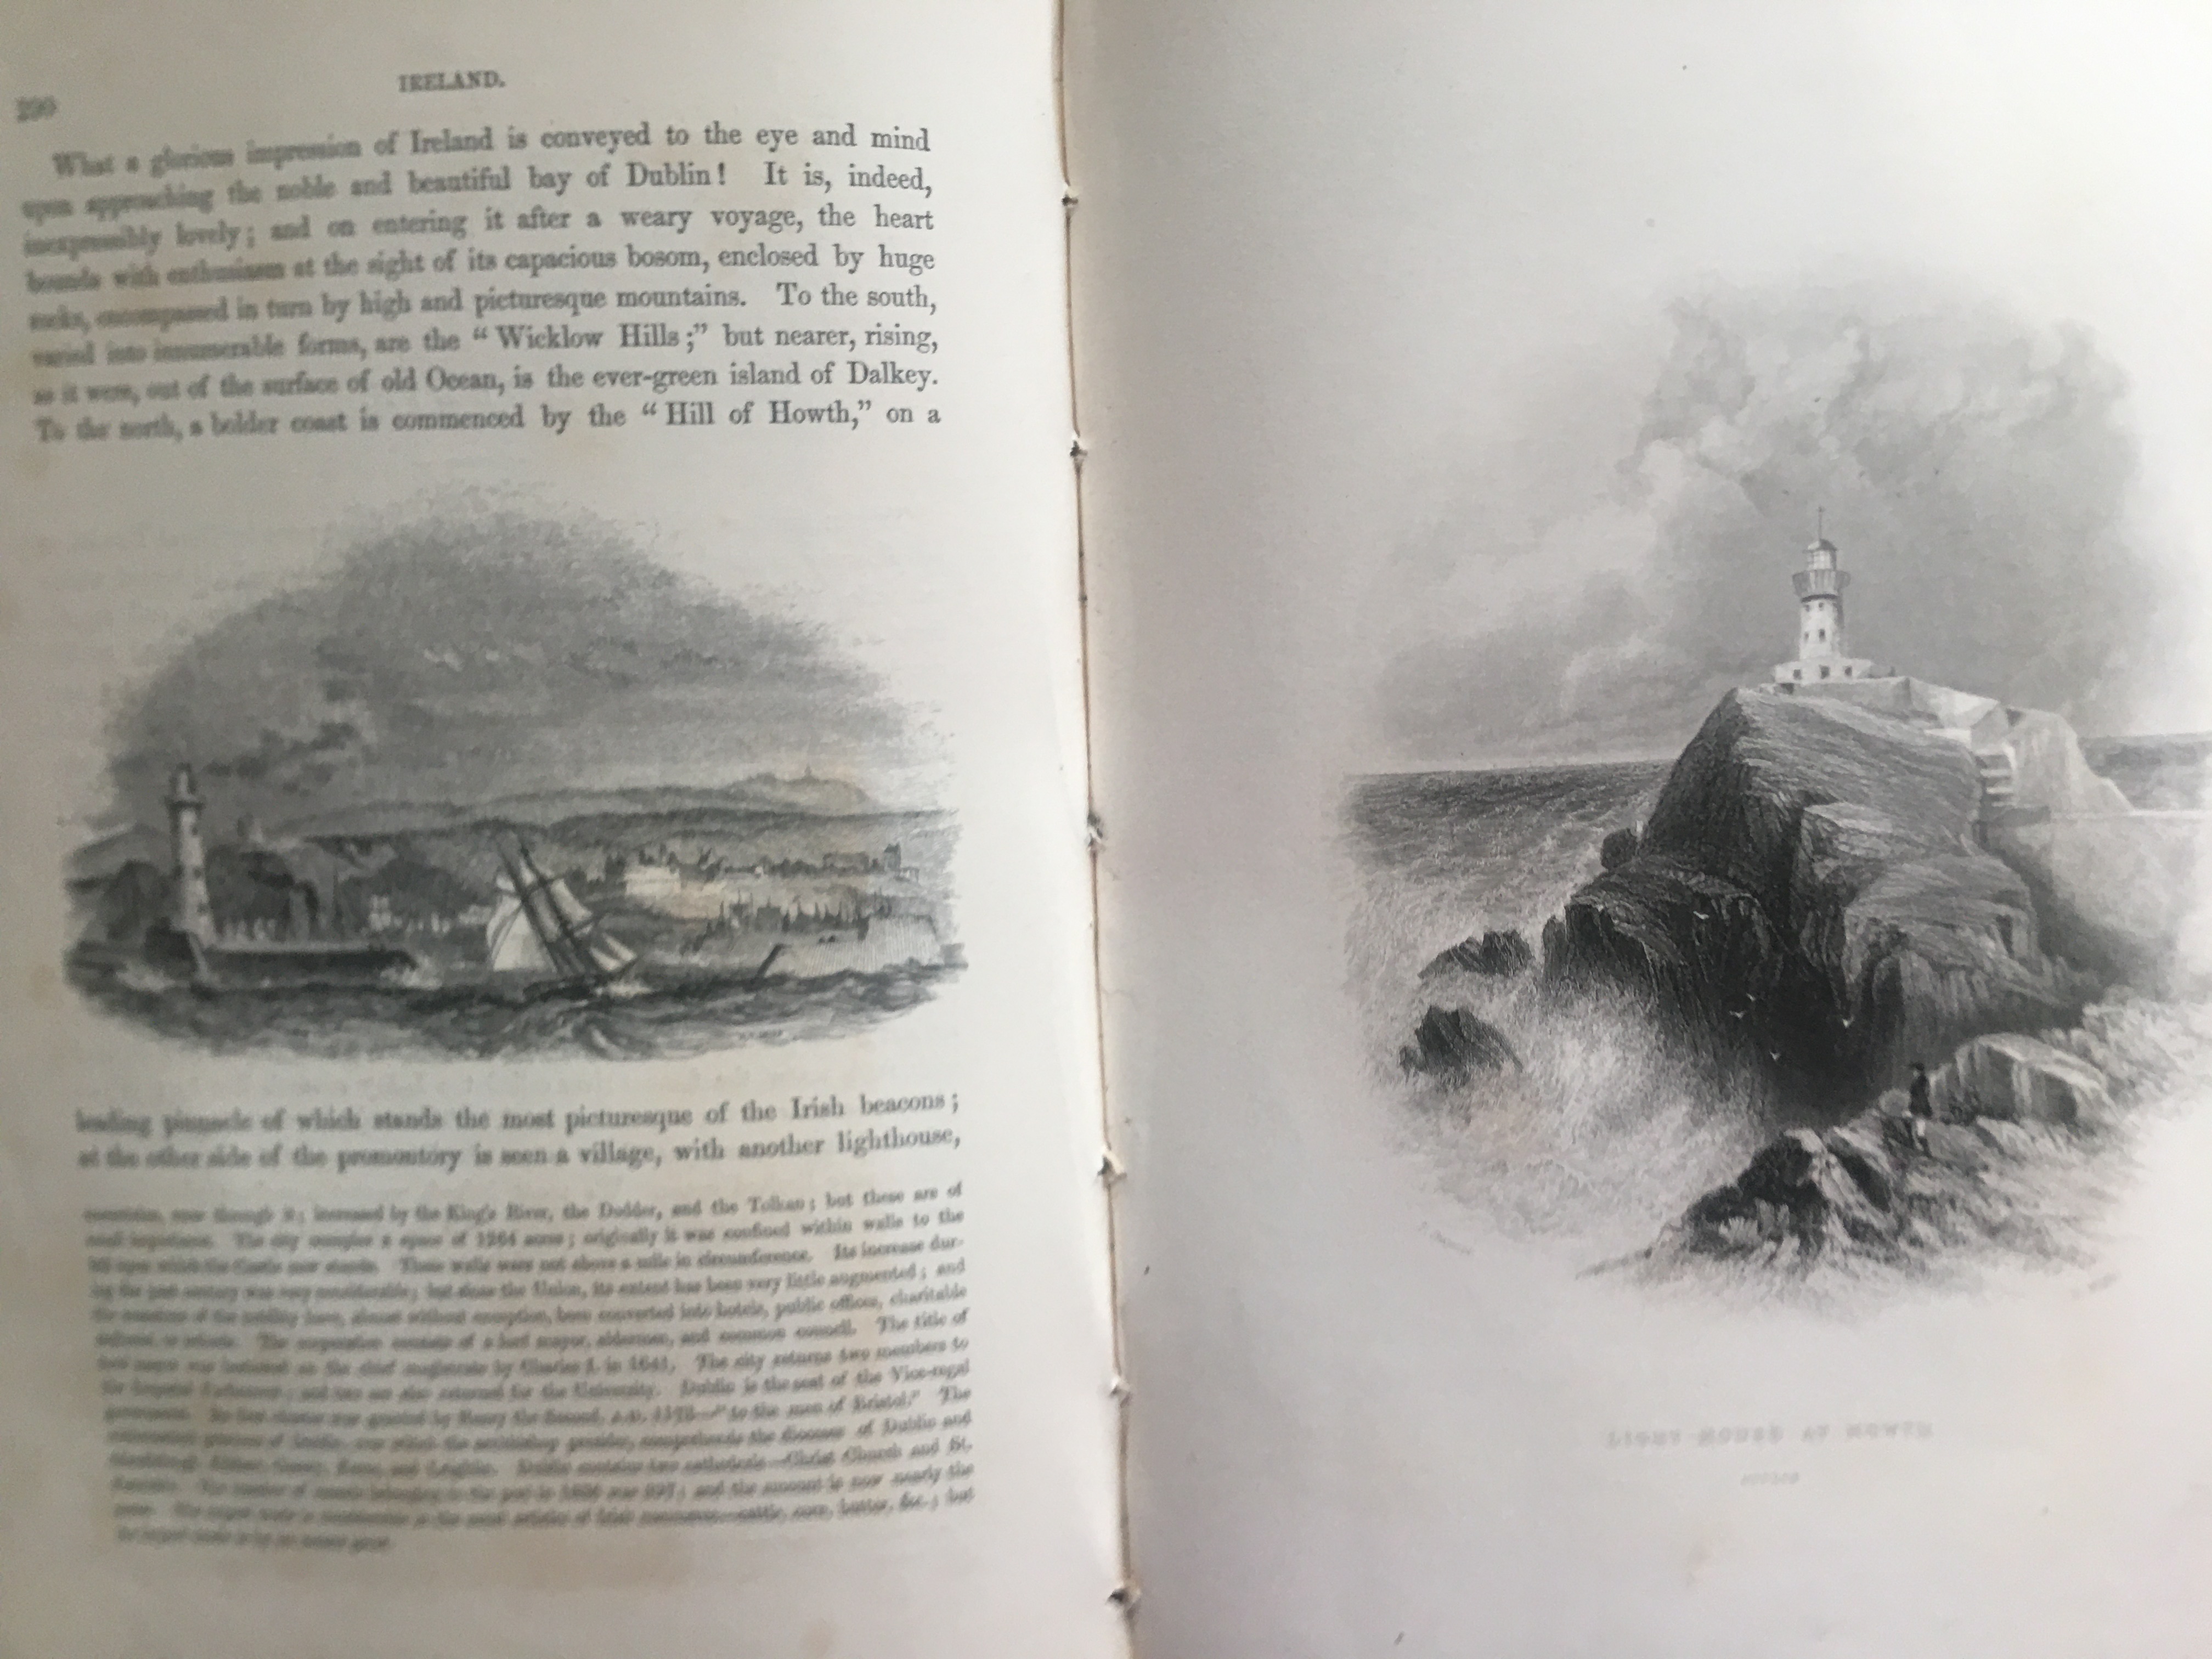 Mr & Mrs S.C. Hall Ireland Its Scenery, Character Vol 2 c1850 Book - Image 8 of 12